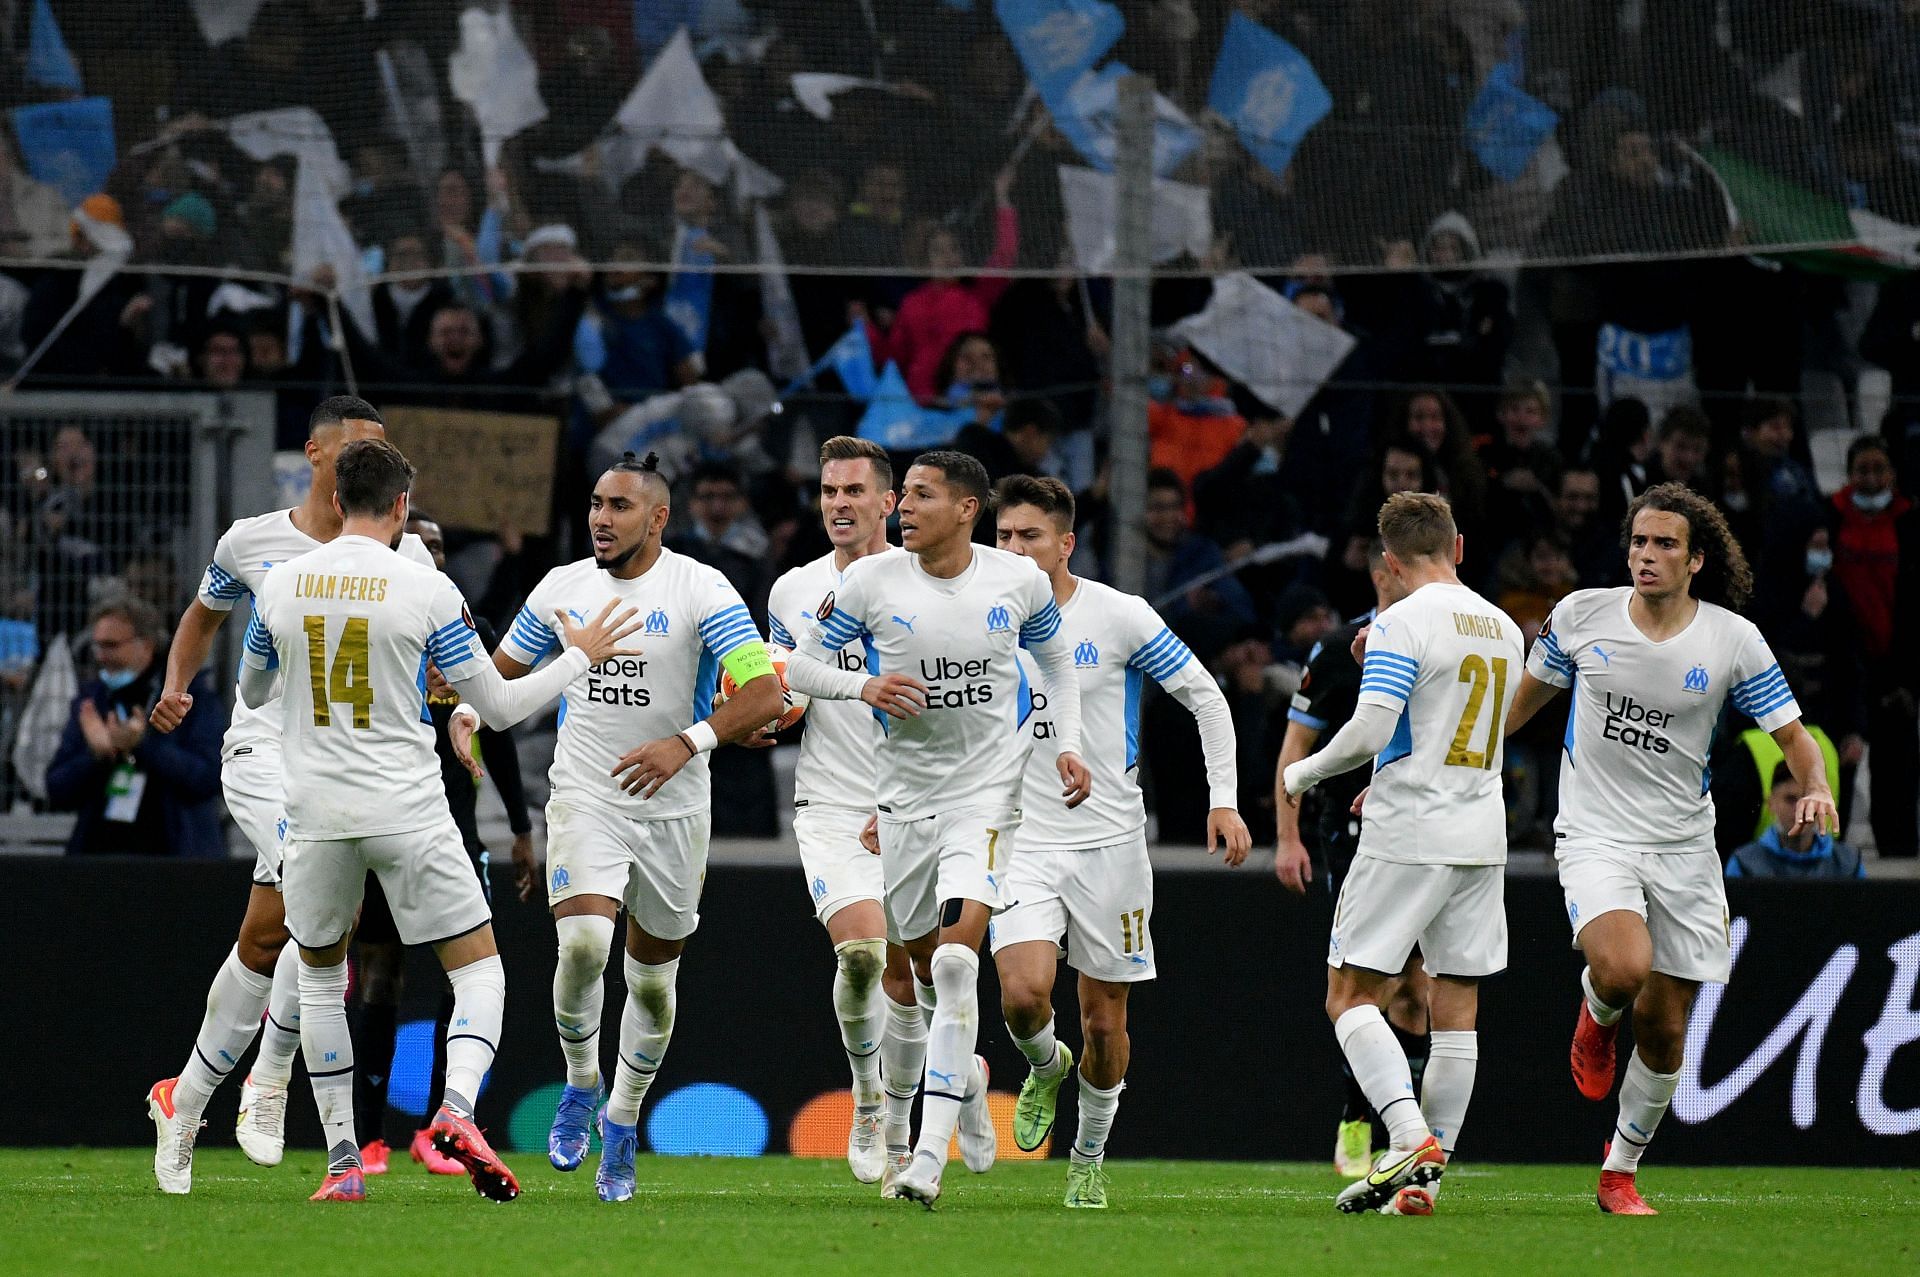 Olympique Marseille will host Montpellier on Saturday - Coupe de France